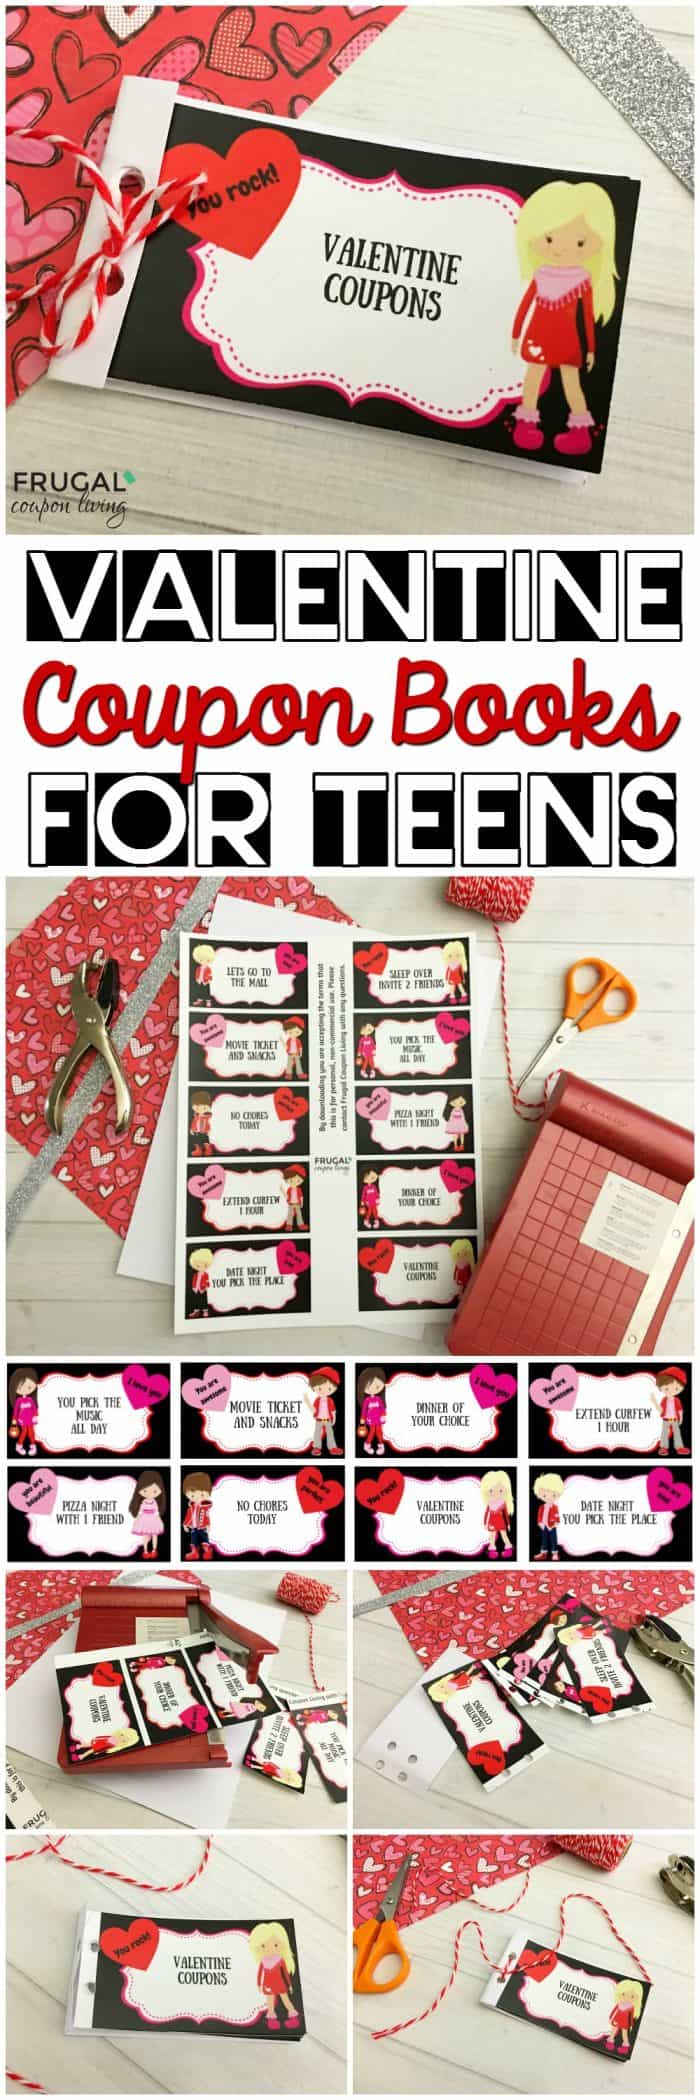 teen-valentine-coupon-books-long-collage-frugal-coupon-living